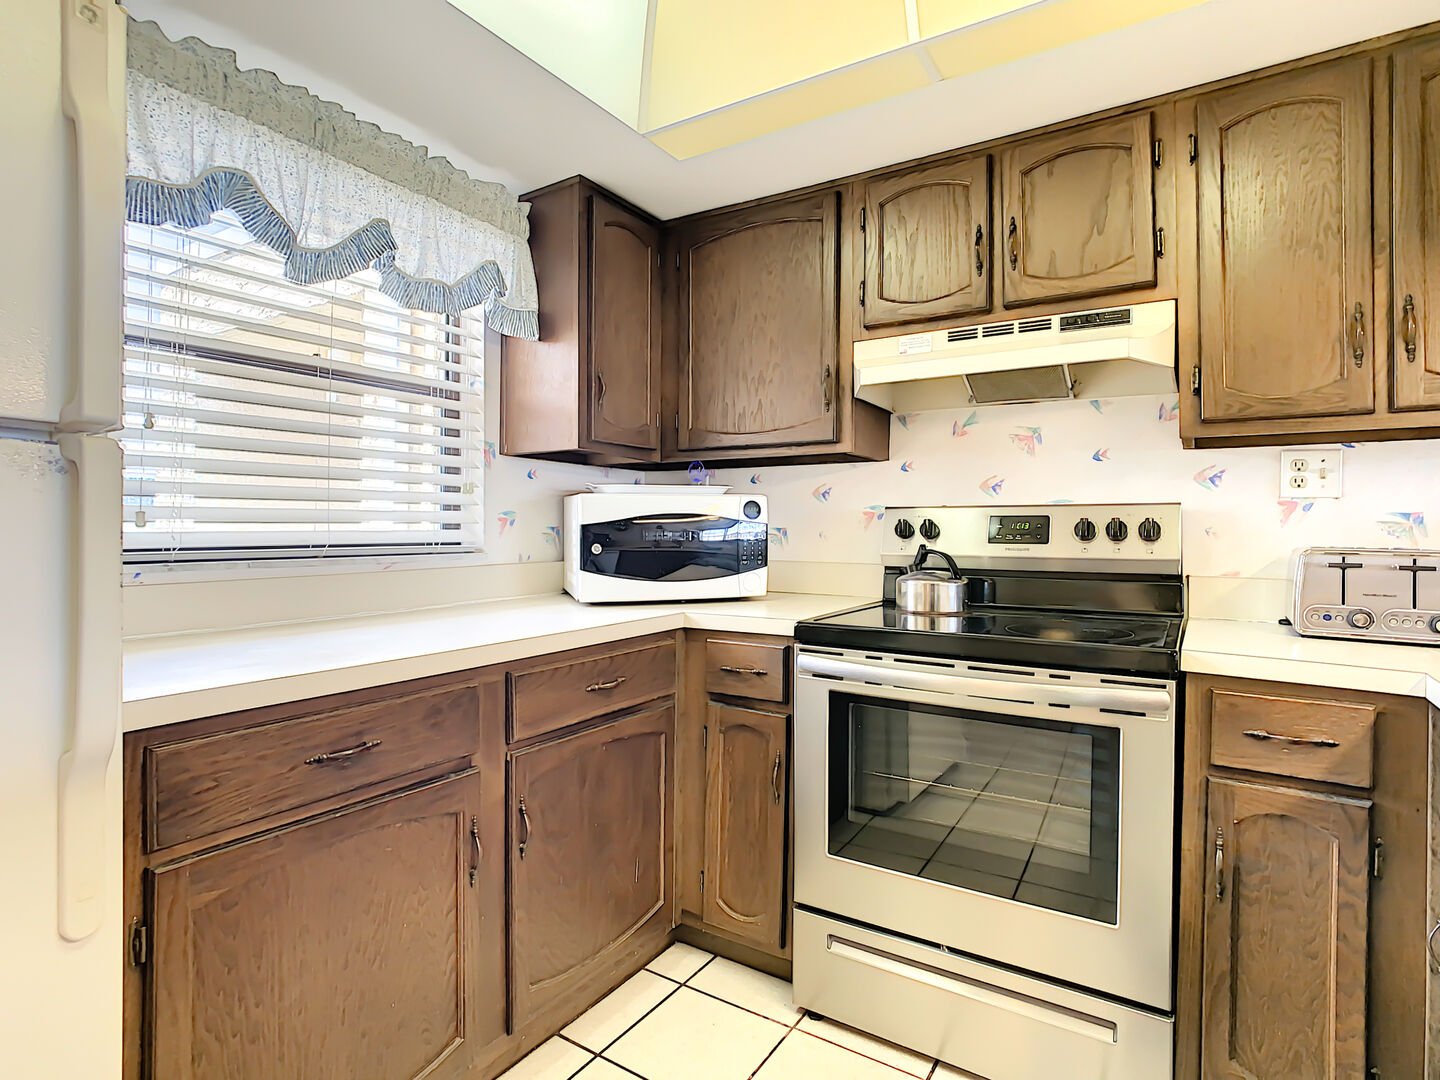 Kitchen with small appliances and large stainless steel oven